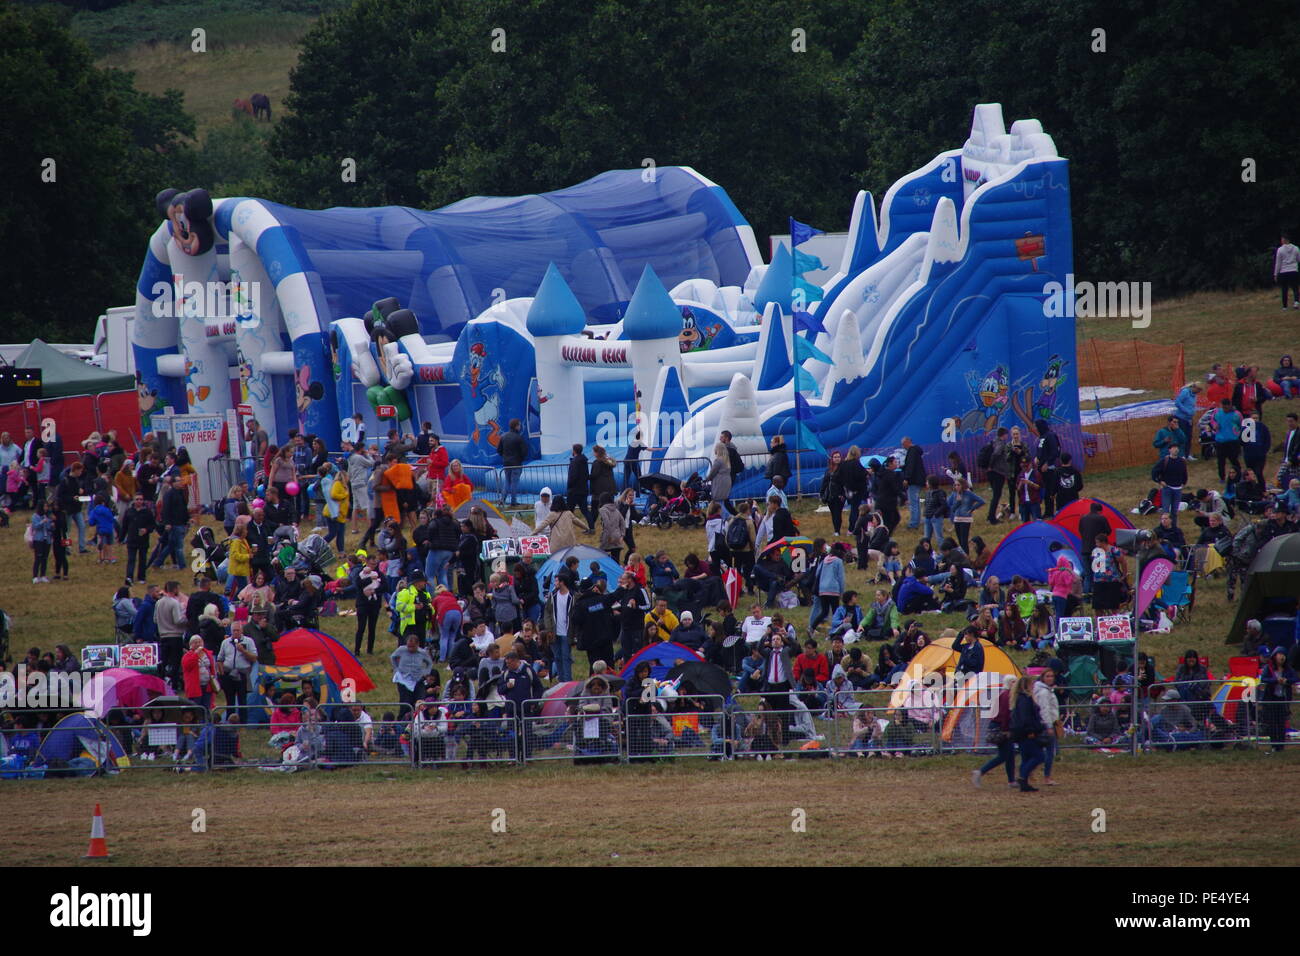 Large Bouncy Castles and Crowd in Wet Weather Clothing. Bristol Balloon Festival, Somerset, UK. August, 2018. Stock Photo